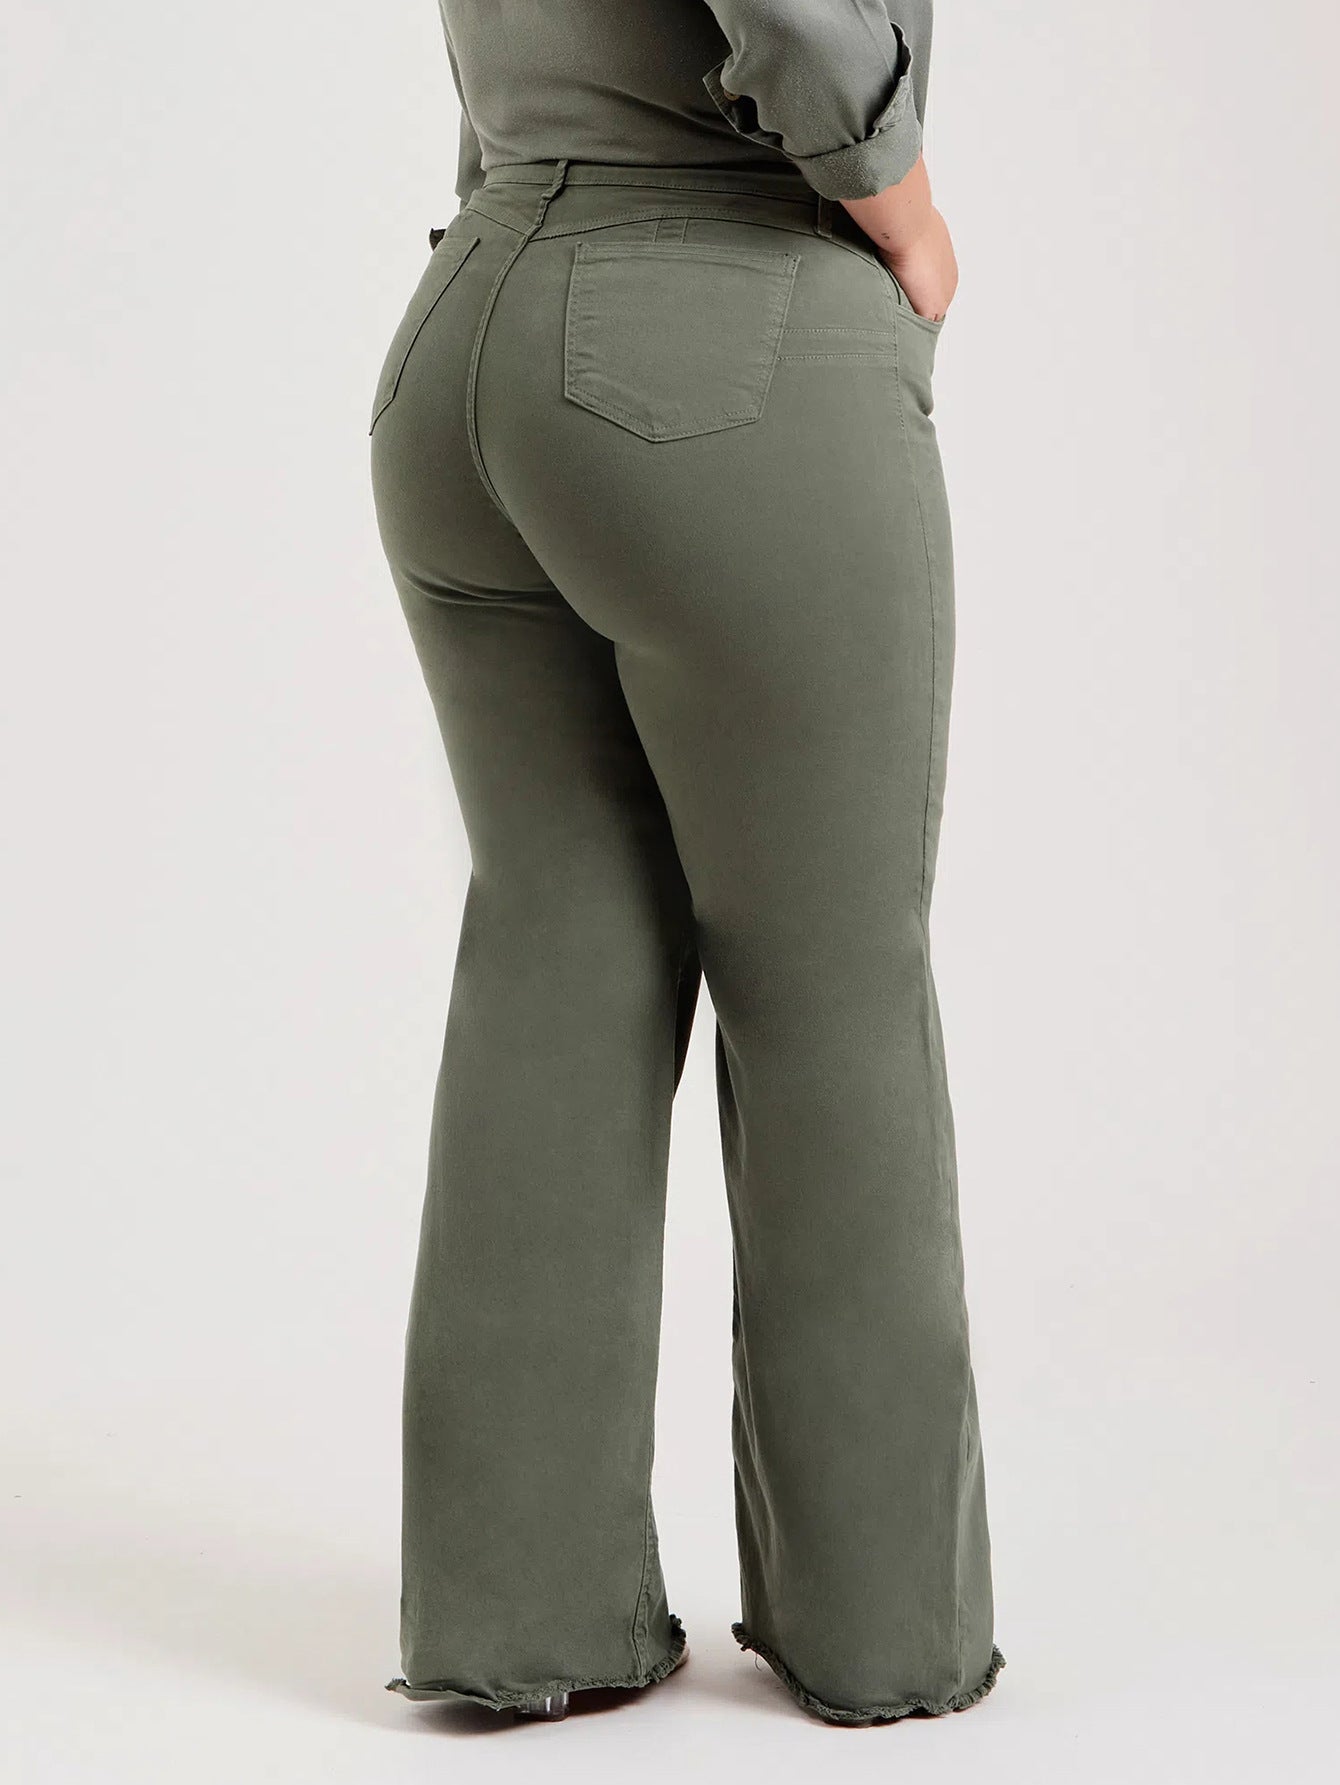 Women's Olive Green Frayed Edge Flare Jeans